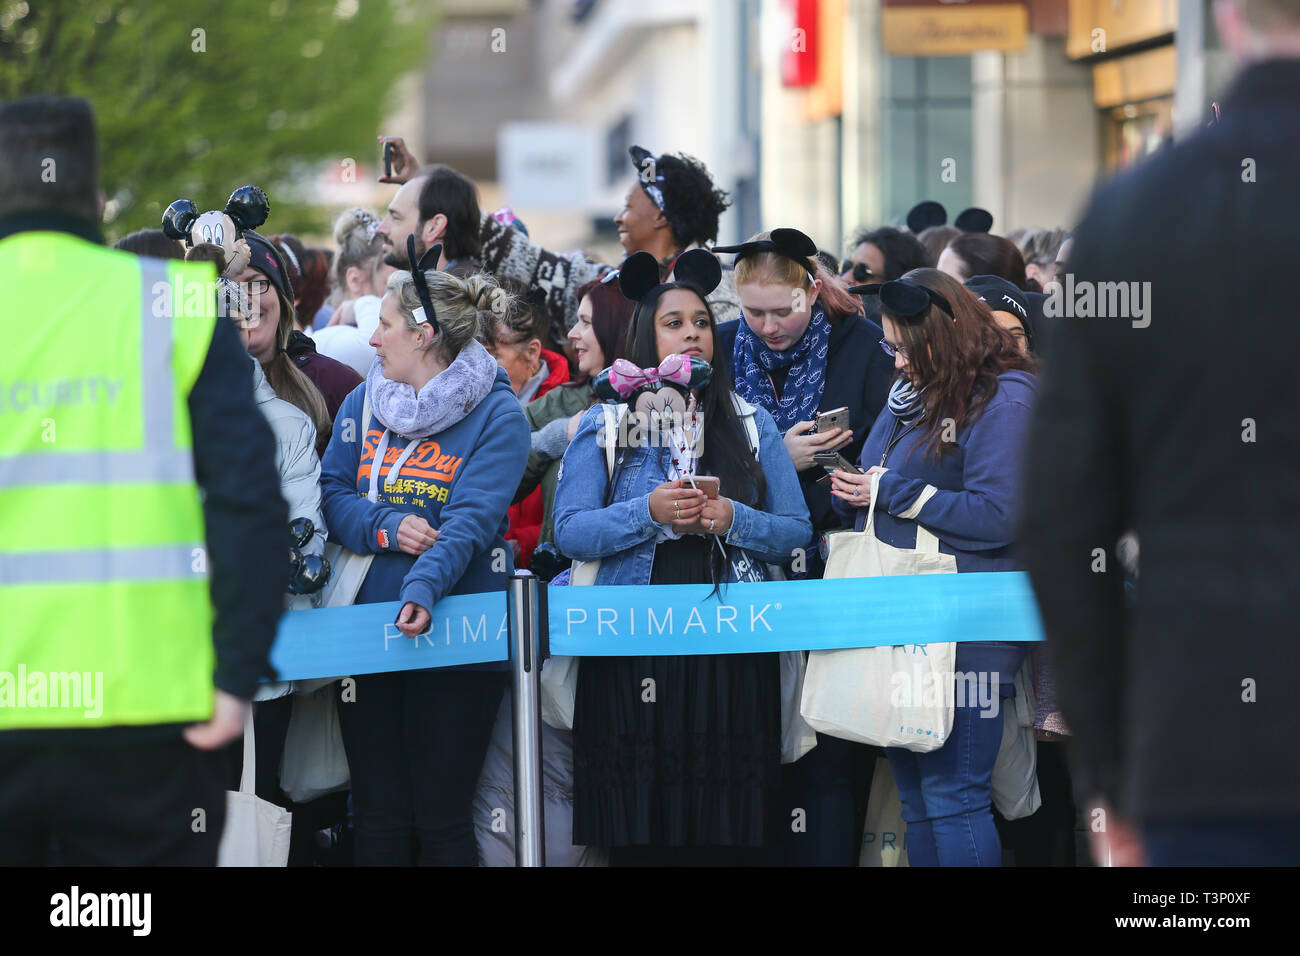 Birmingham, UK. 11th April,2019. The world's biggest Primark store opens today in Birmingham, as customers queue to enter. Peter Lopeman/Alamy Live News Stock Photo